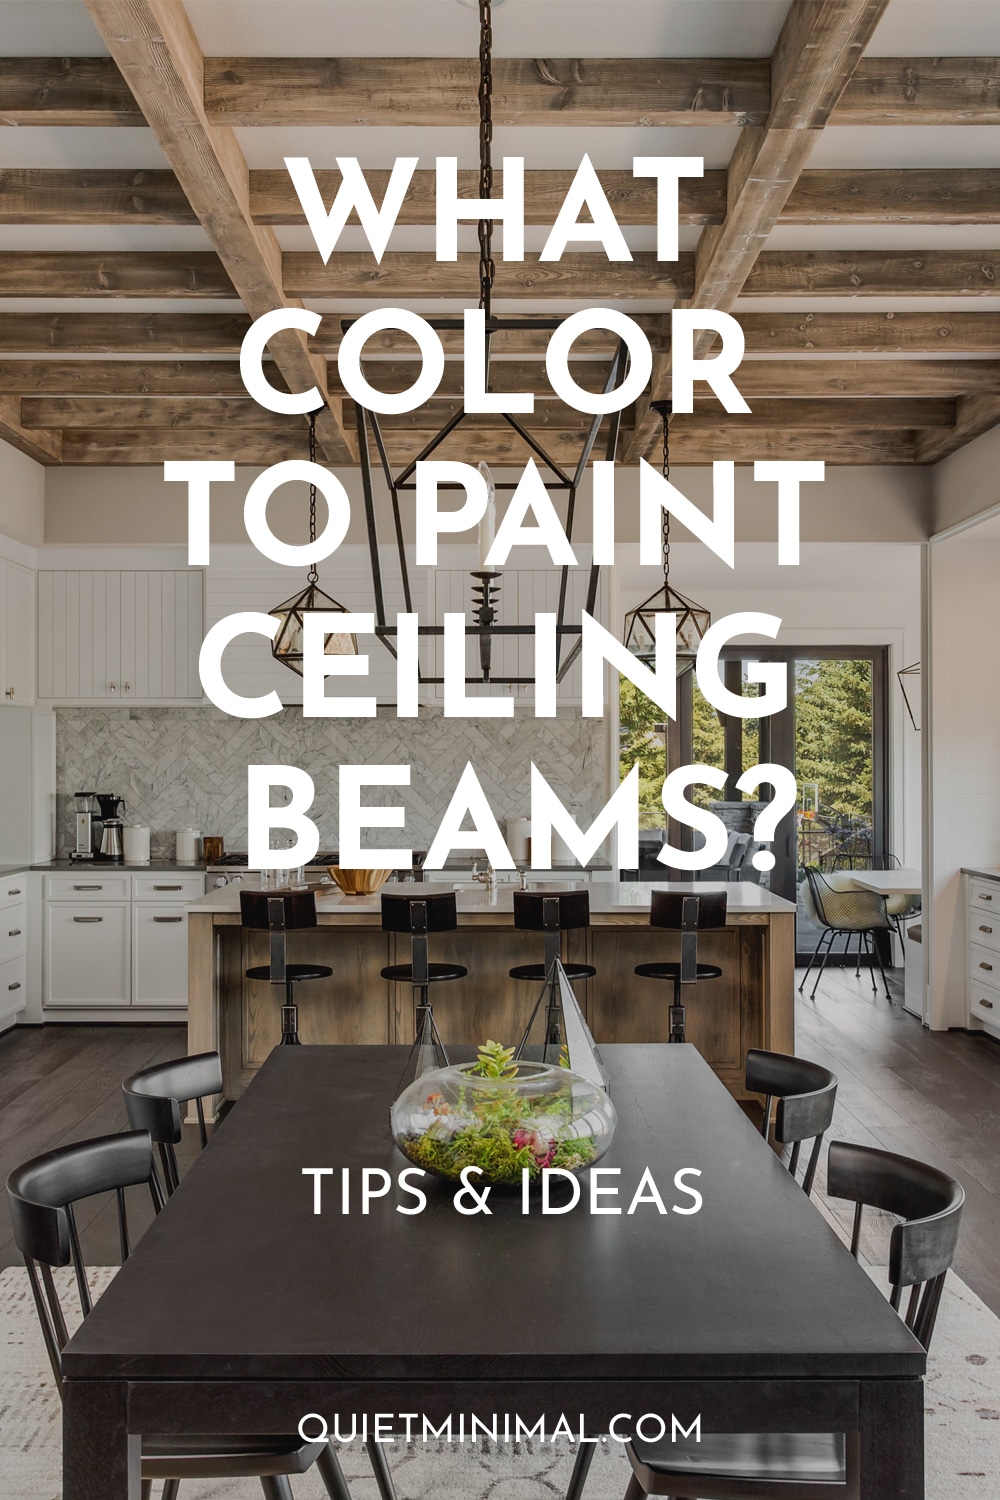 what color to paint ceiling beams,